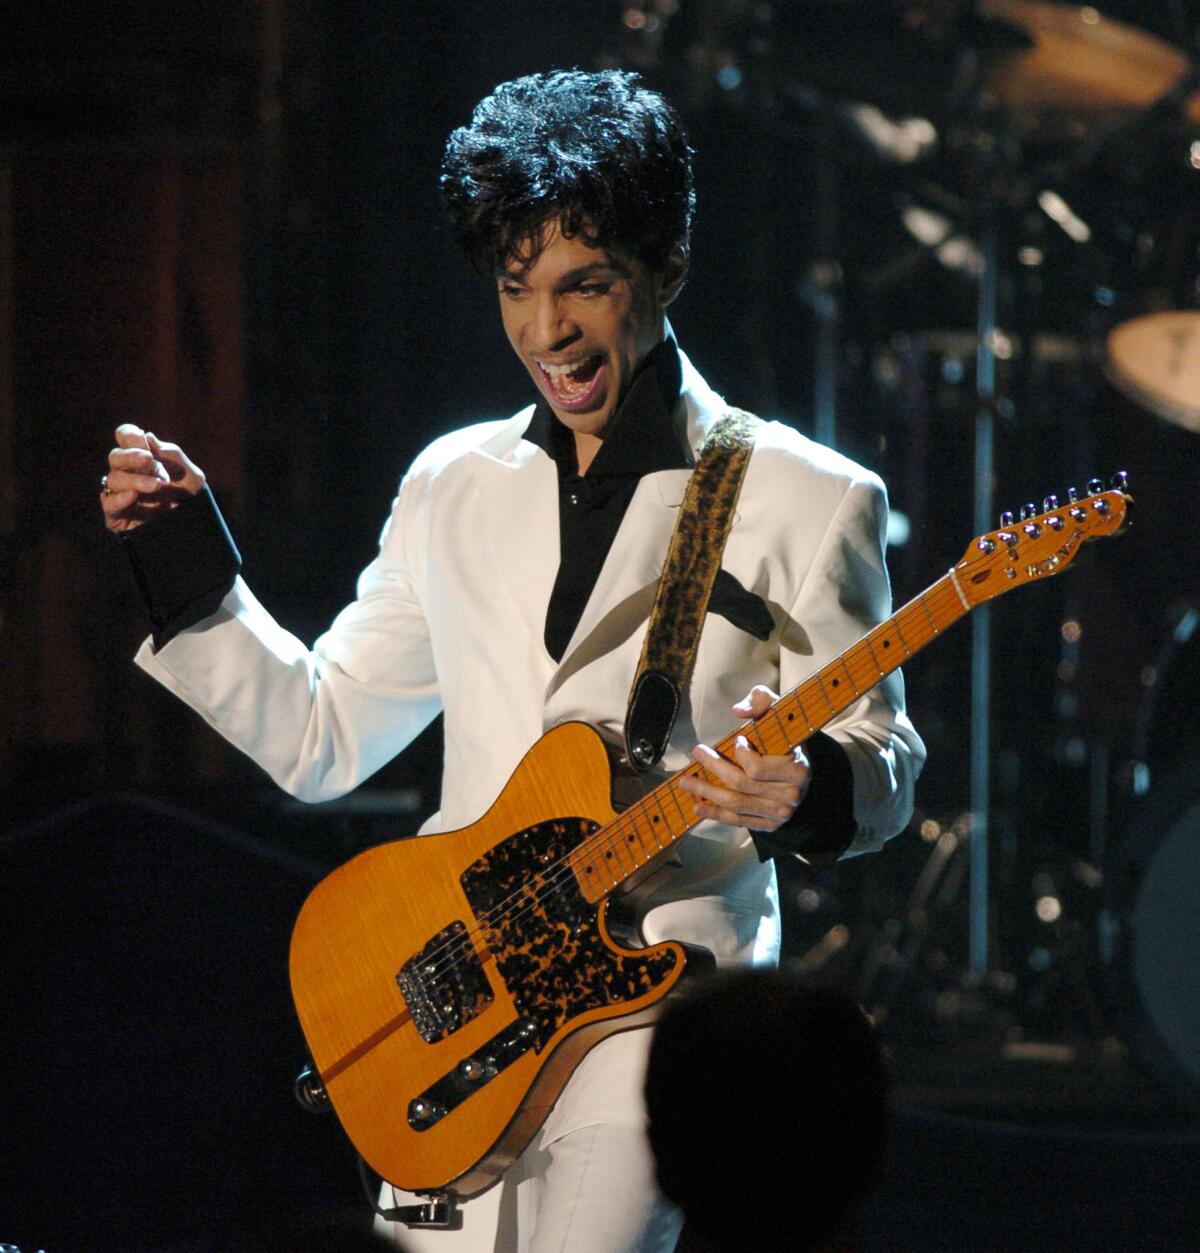 Prince performs on March 15, 2004, at the Waldorf Astoria Hotel in New York after being inducted into the Rock and Roll Hall of Fame.